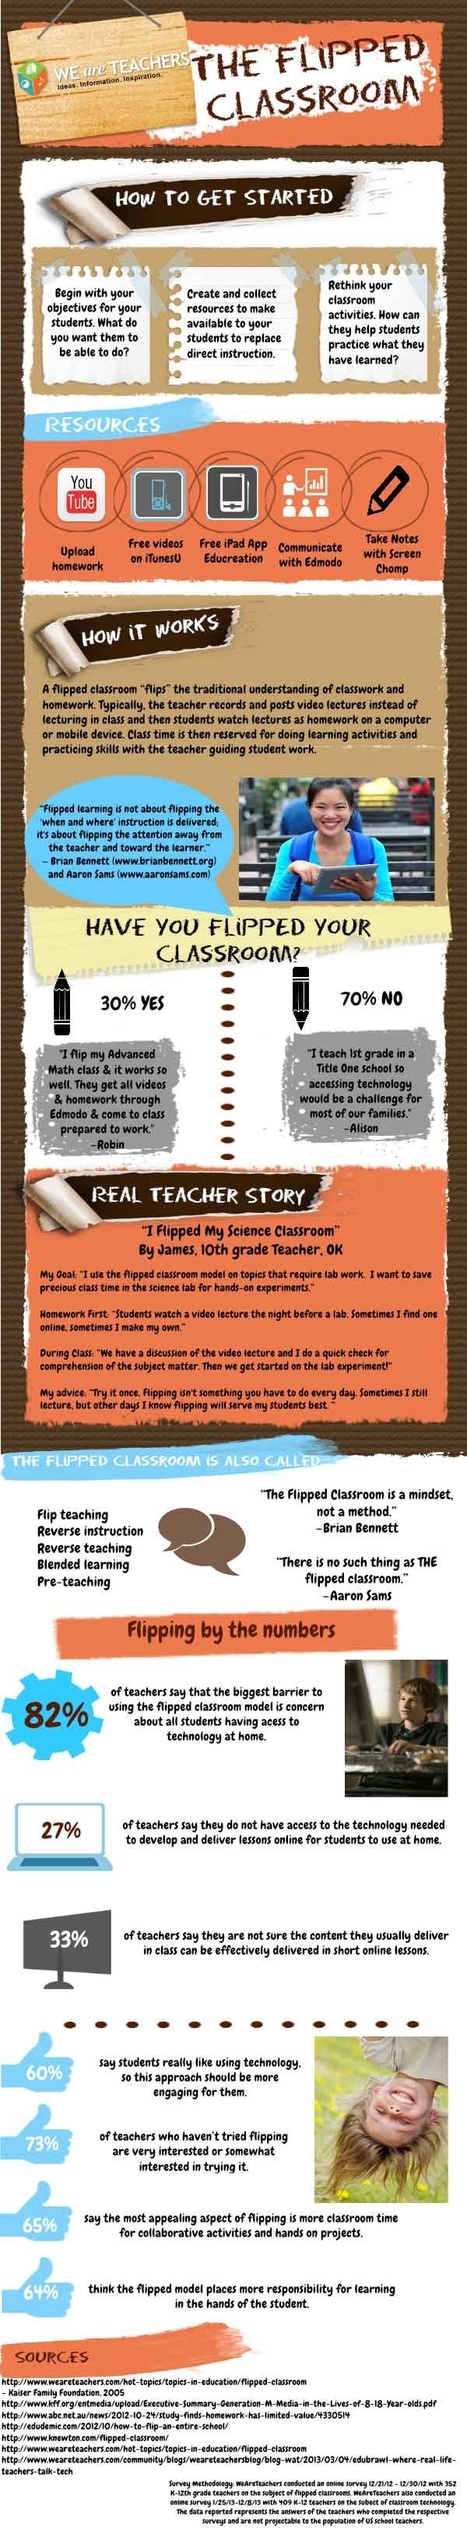 Flipped Learning explained visually [Infographic] | 21st Century Learning and Teaching | Scoop.it